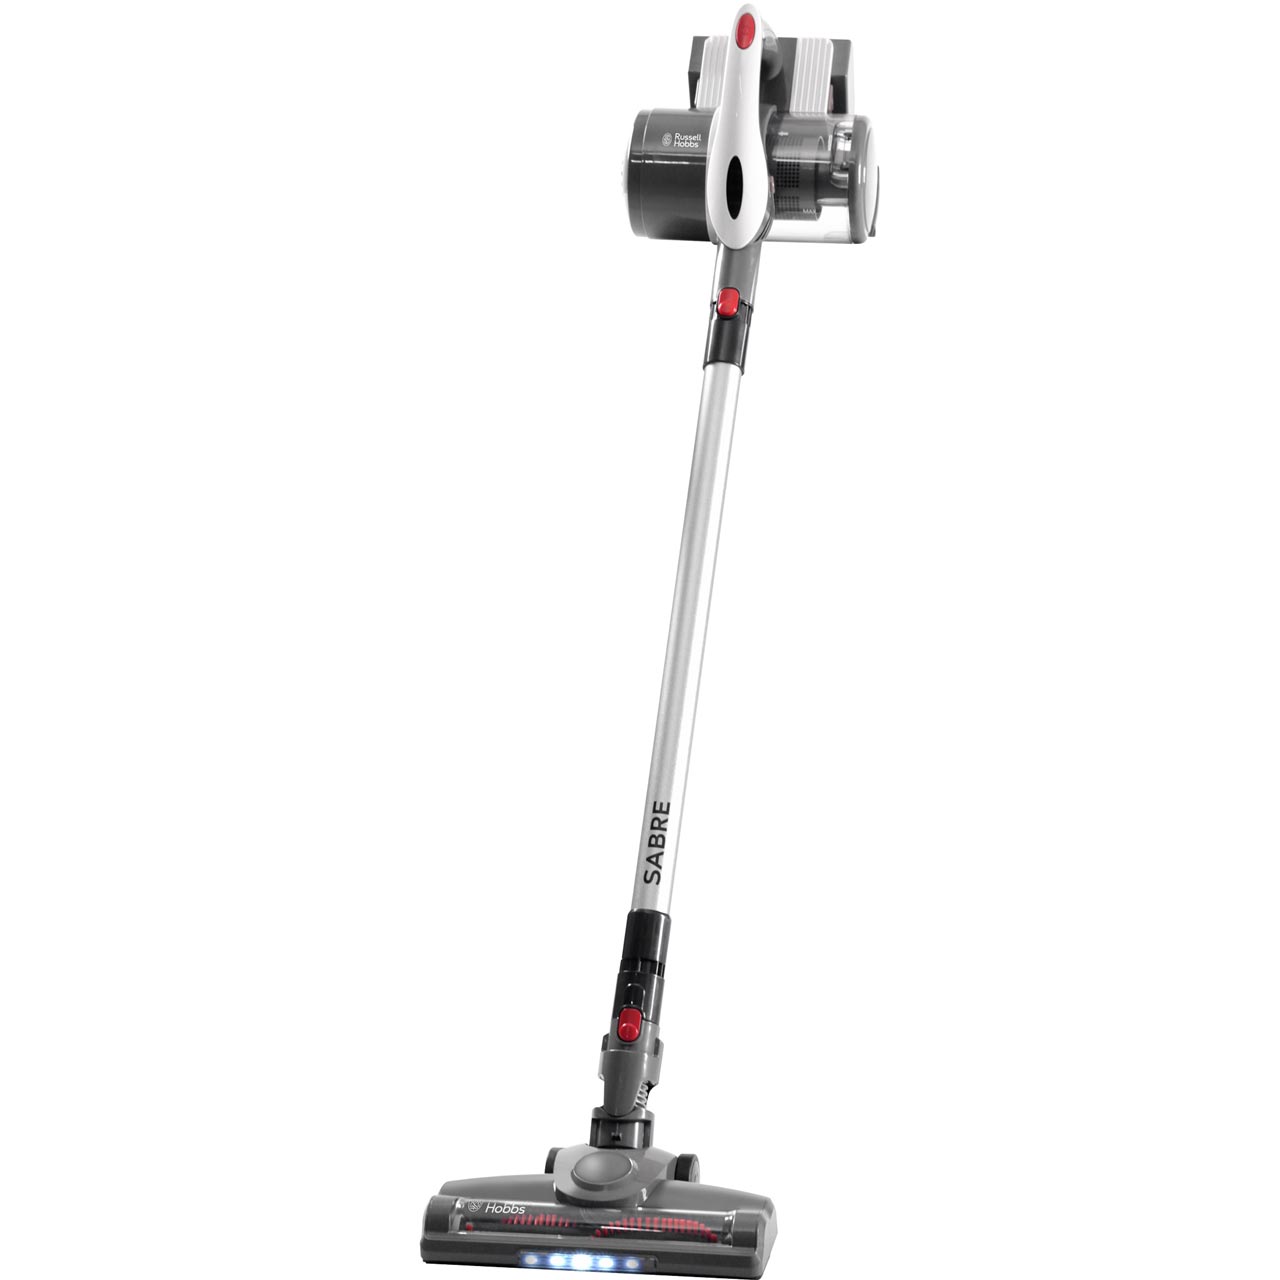 Russell Hobbs Sabre RHHS3001 Cordless Vacuum Cleaner with up to 25 Minutes Run Time Review